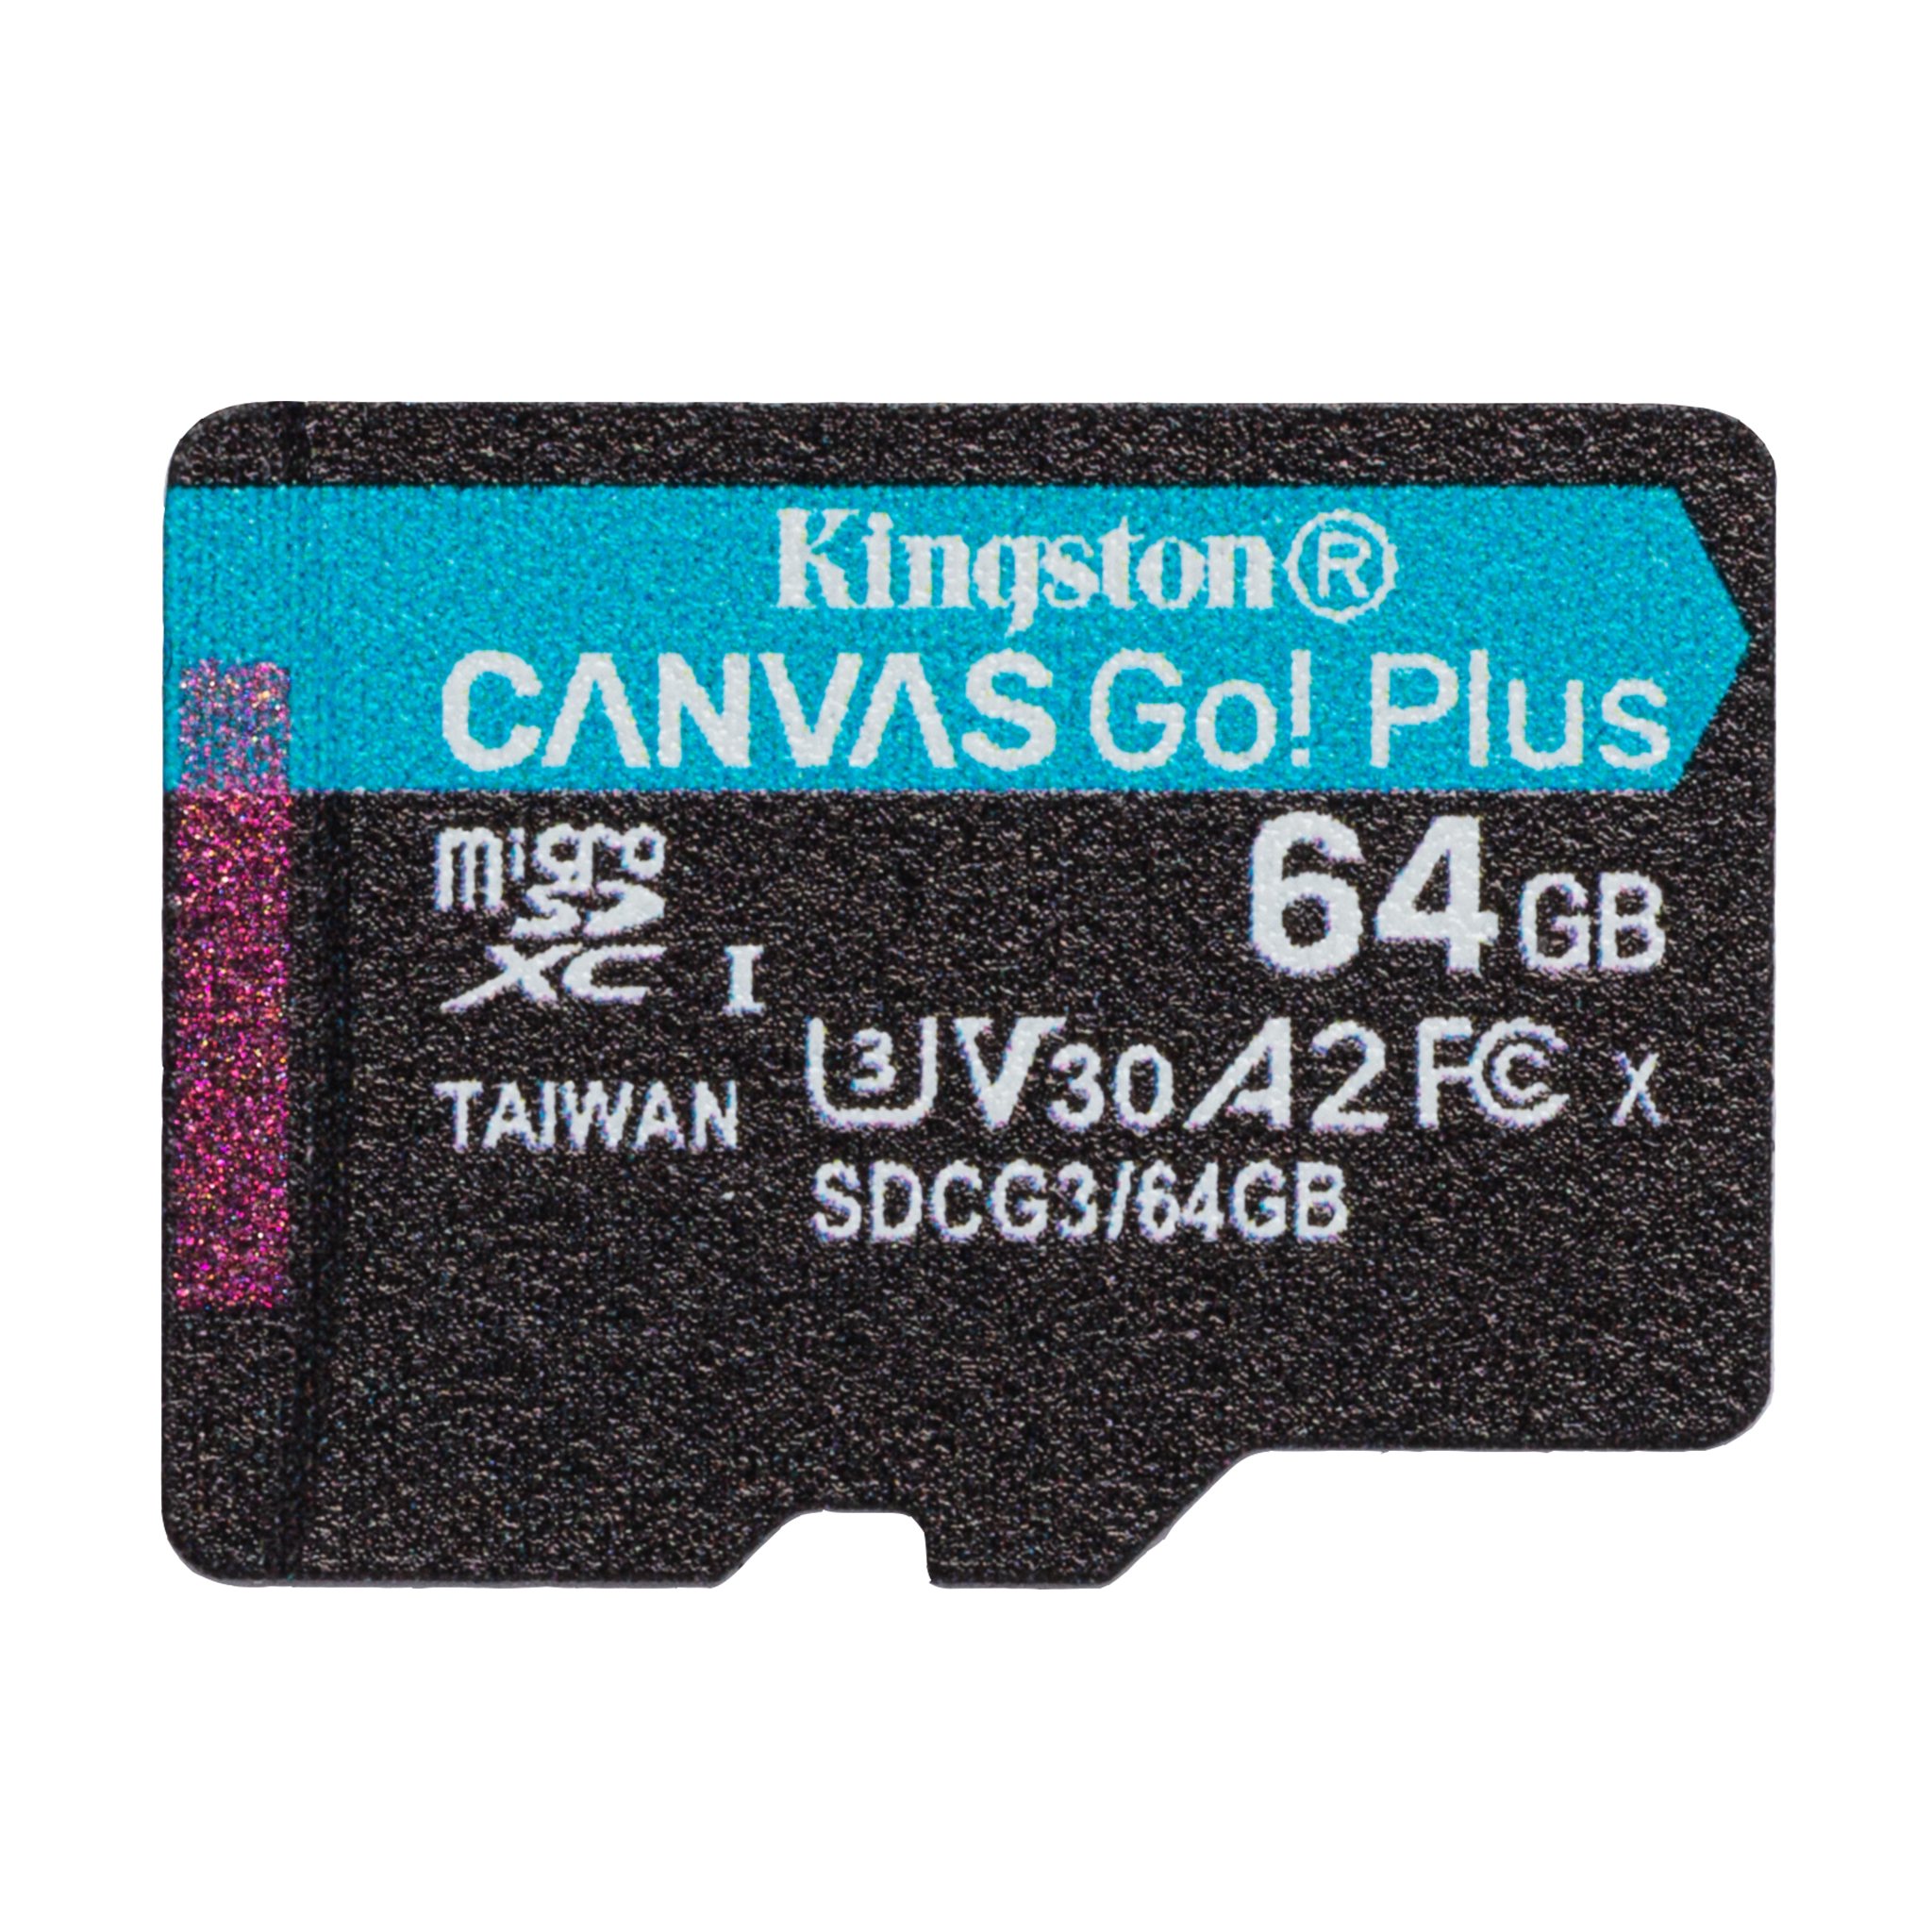 SanFlash Kingston 64GB React MicroSDXC for Micromax E484 with SD Adapter 100MBs Works with Kingston